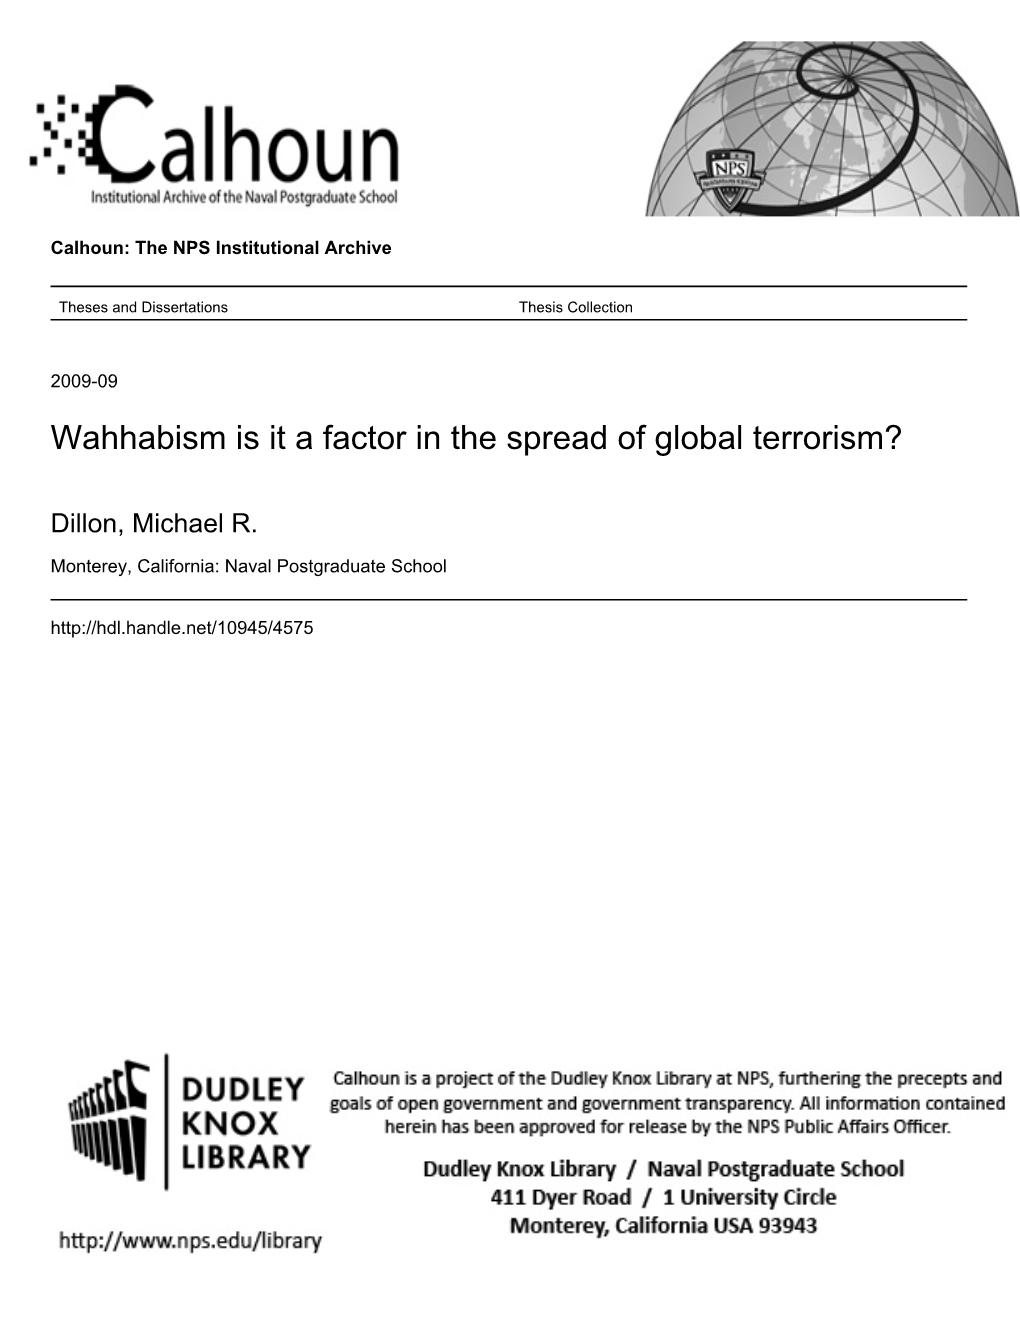 Wahhabism Is It a Factor in the Spread of Global Terrorism?